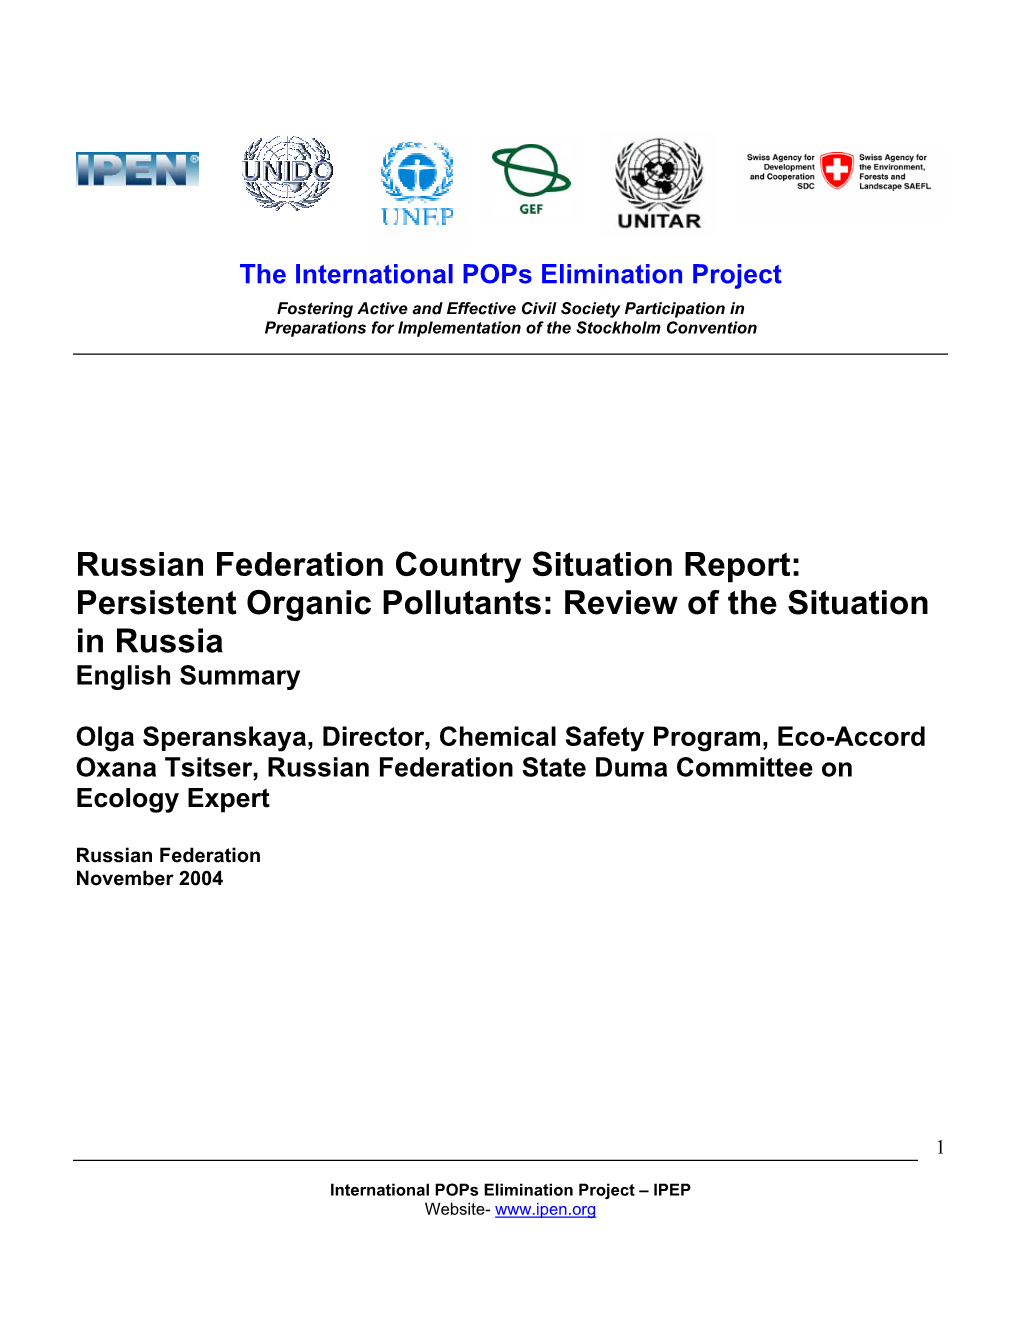 Persistent Organic Pollutants: Review of the Situation in Russia English Summary